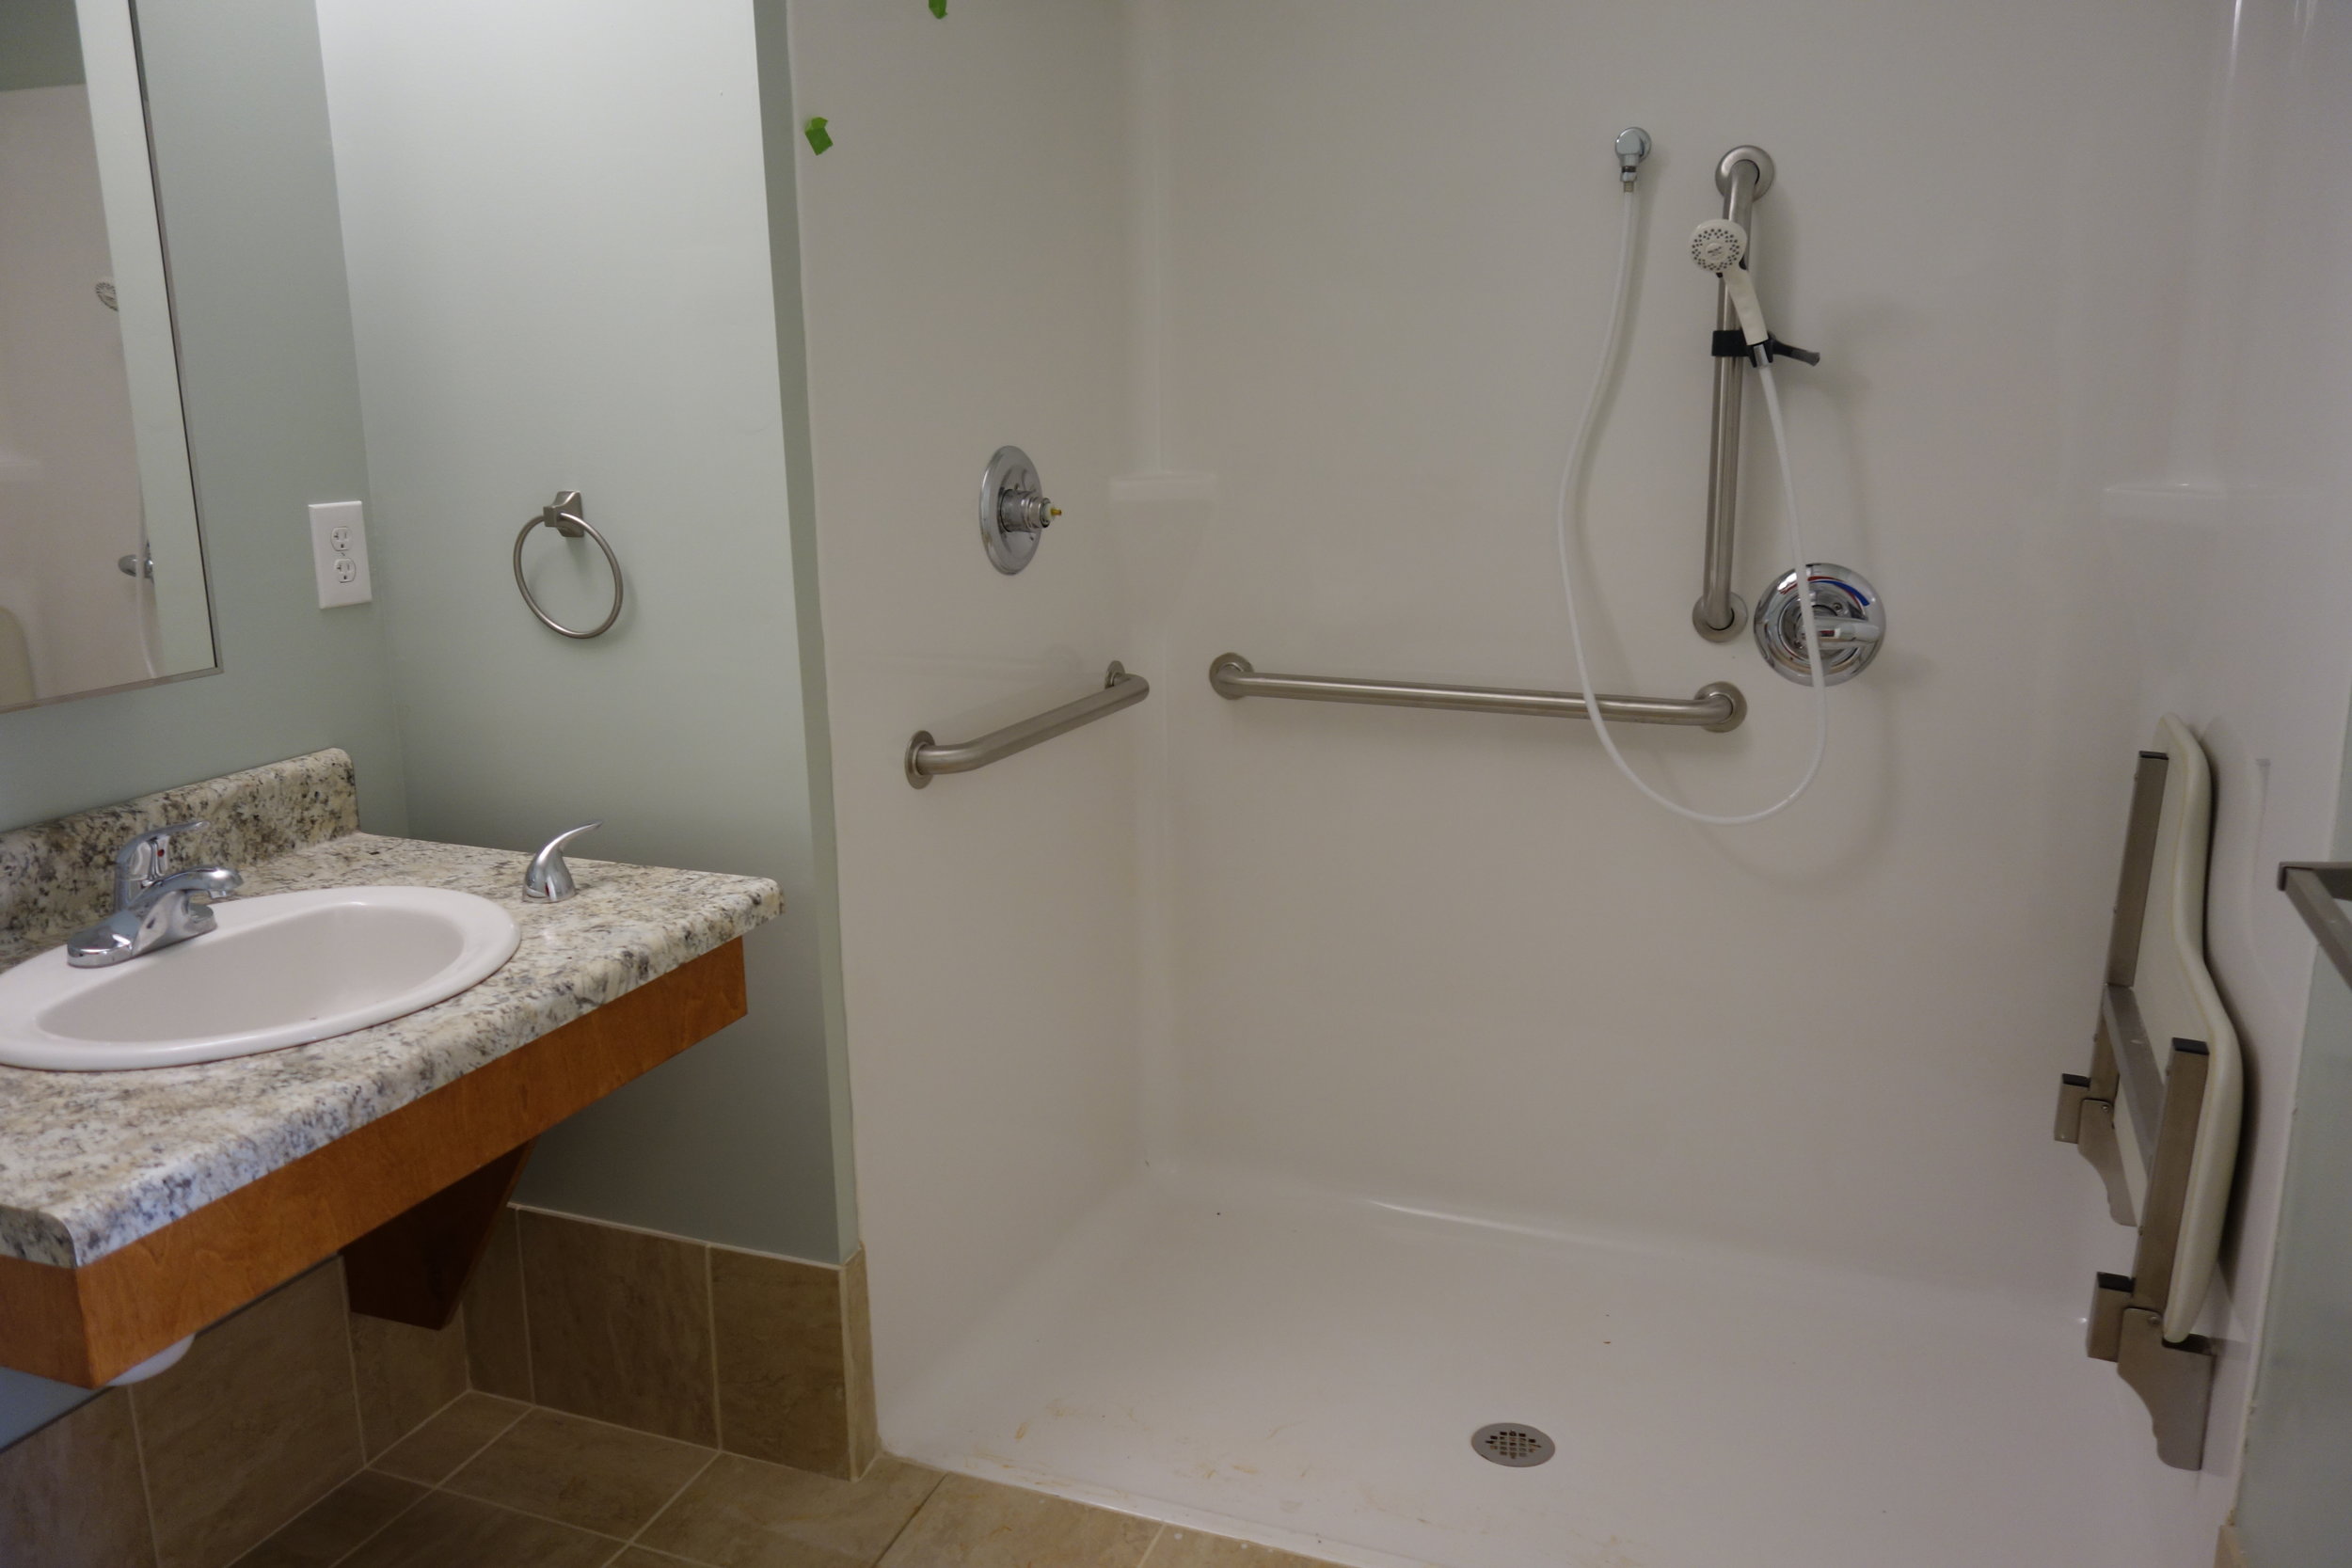 An accessible bathroom with handrails and a fold down seat for accessibility